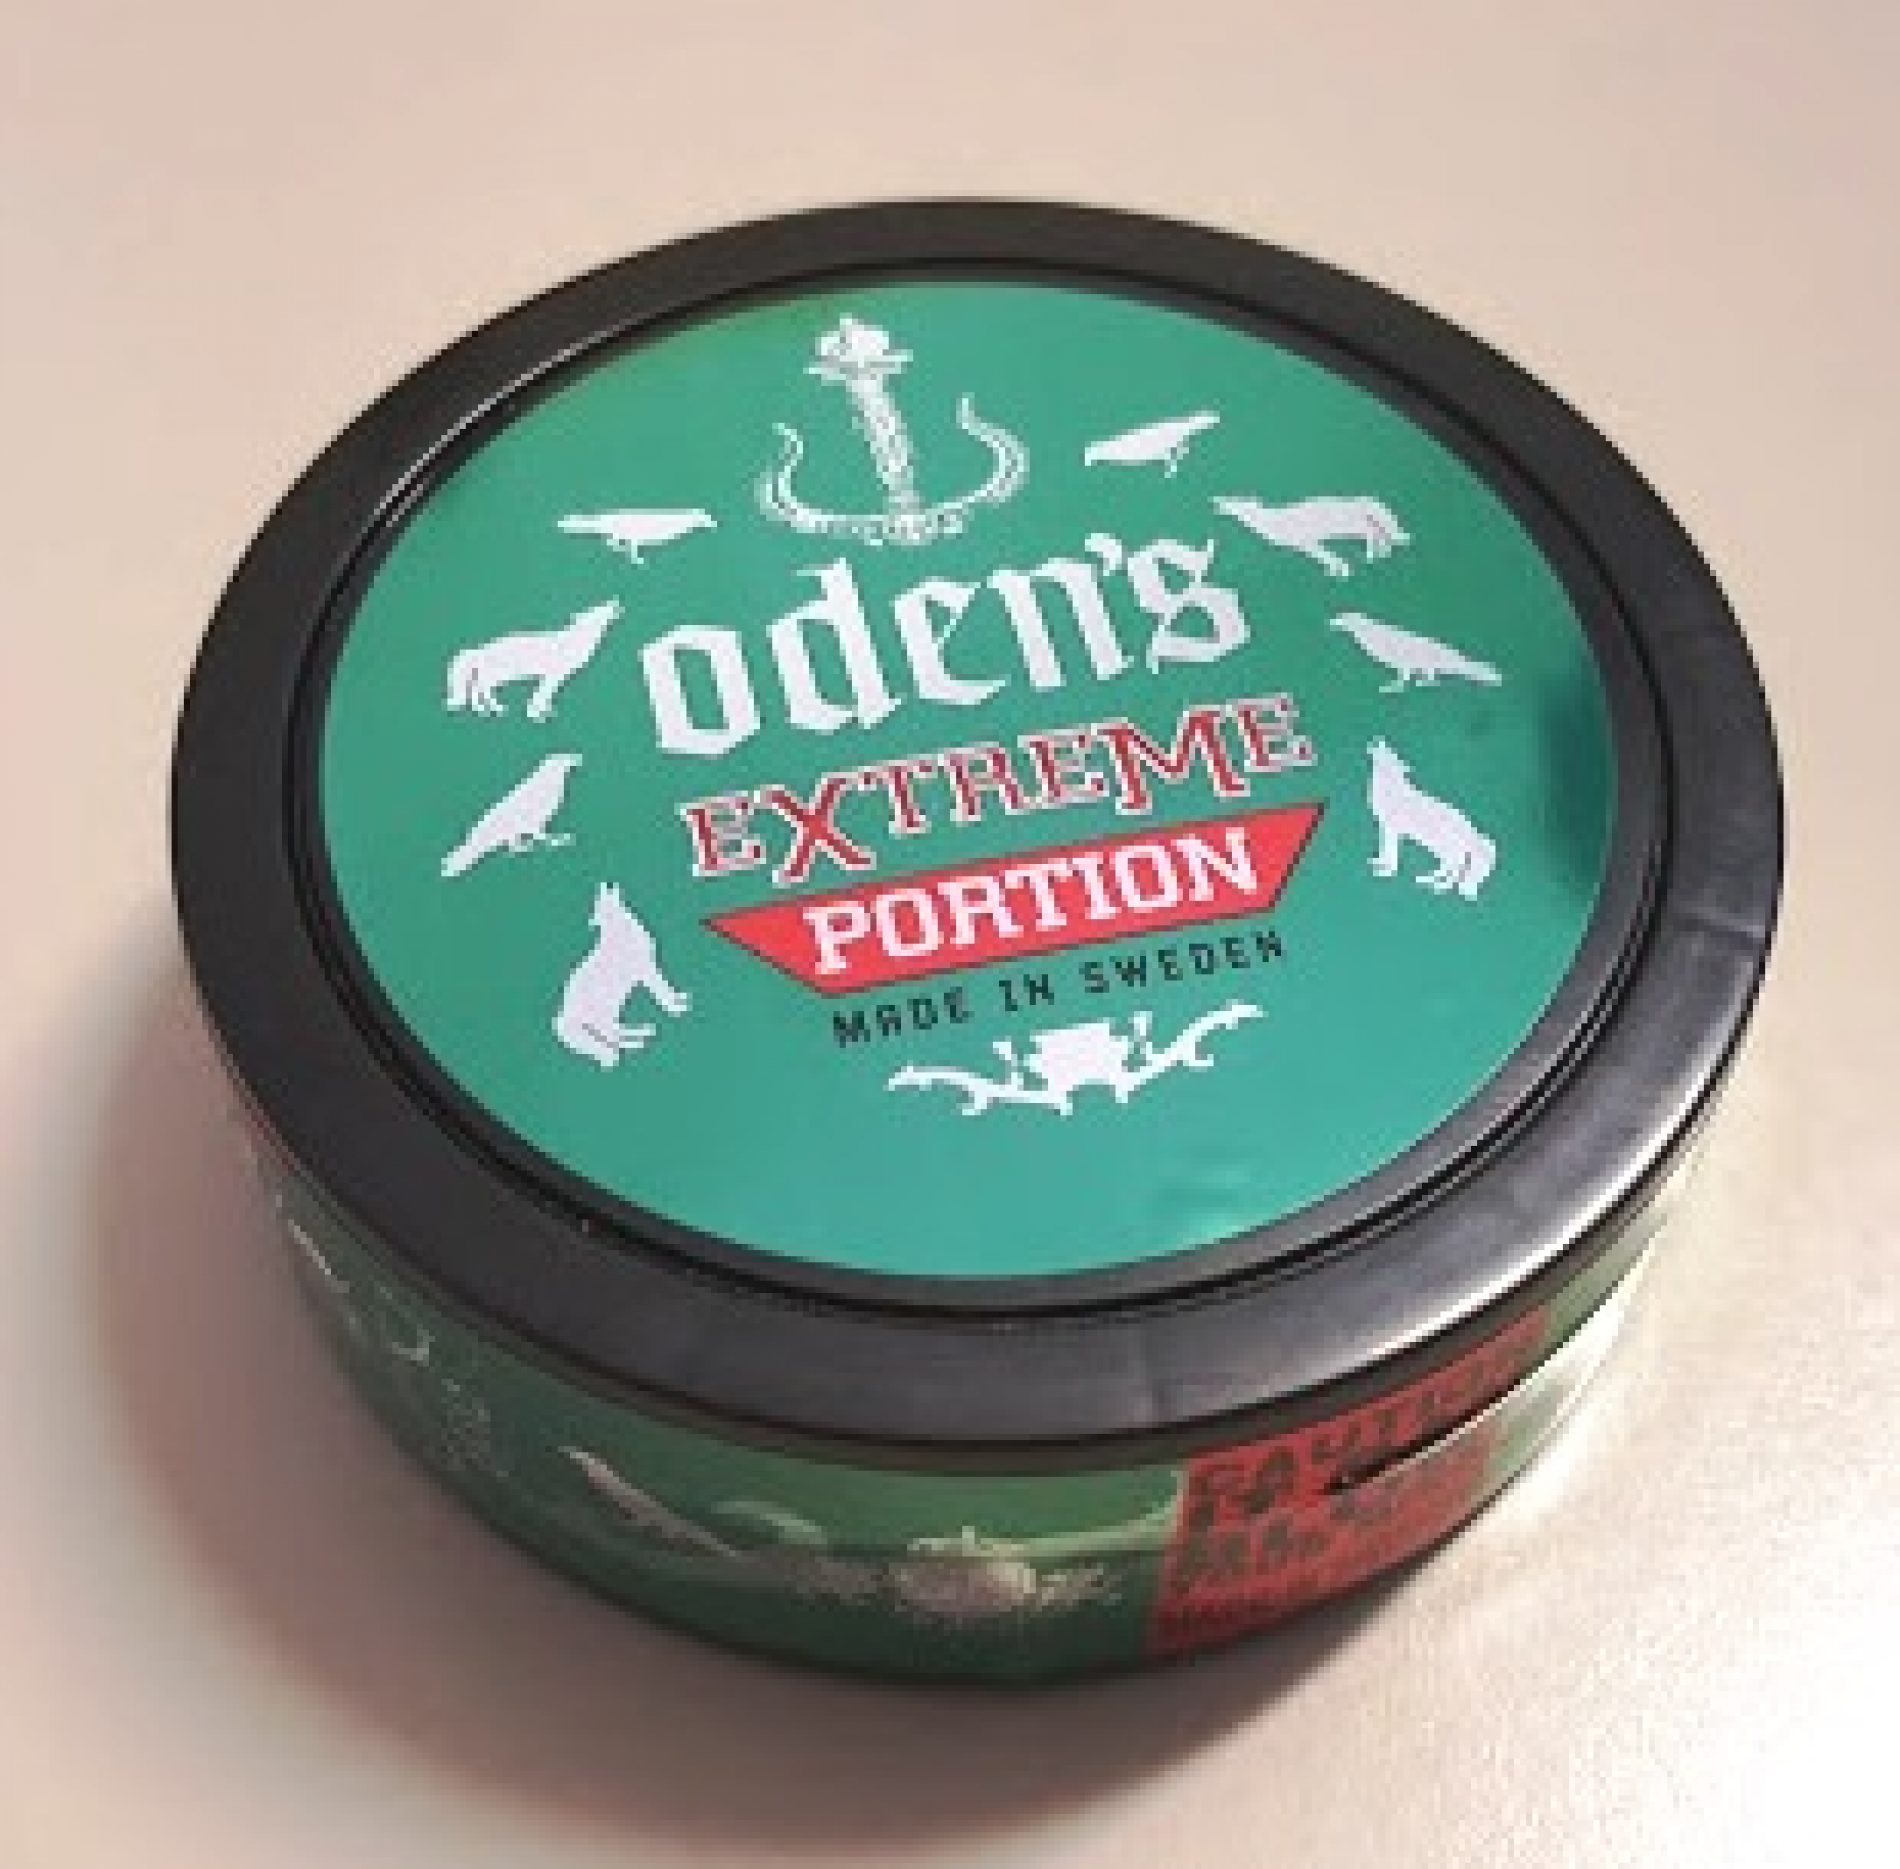 Oden’s Extreme Double Mint Snus Review